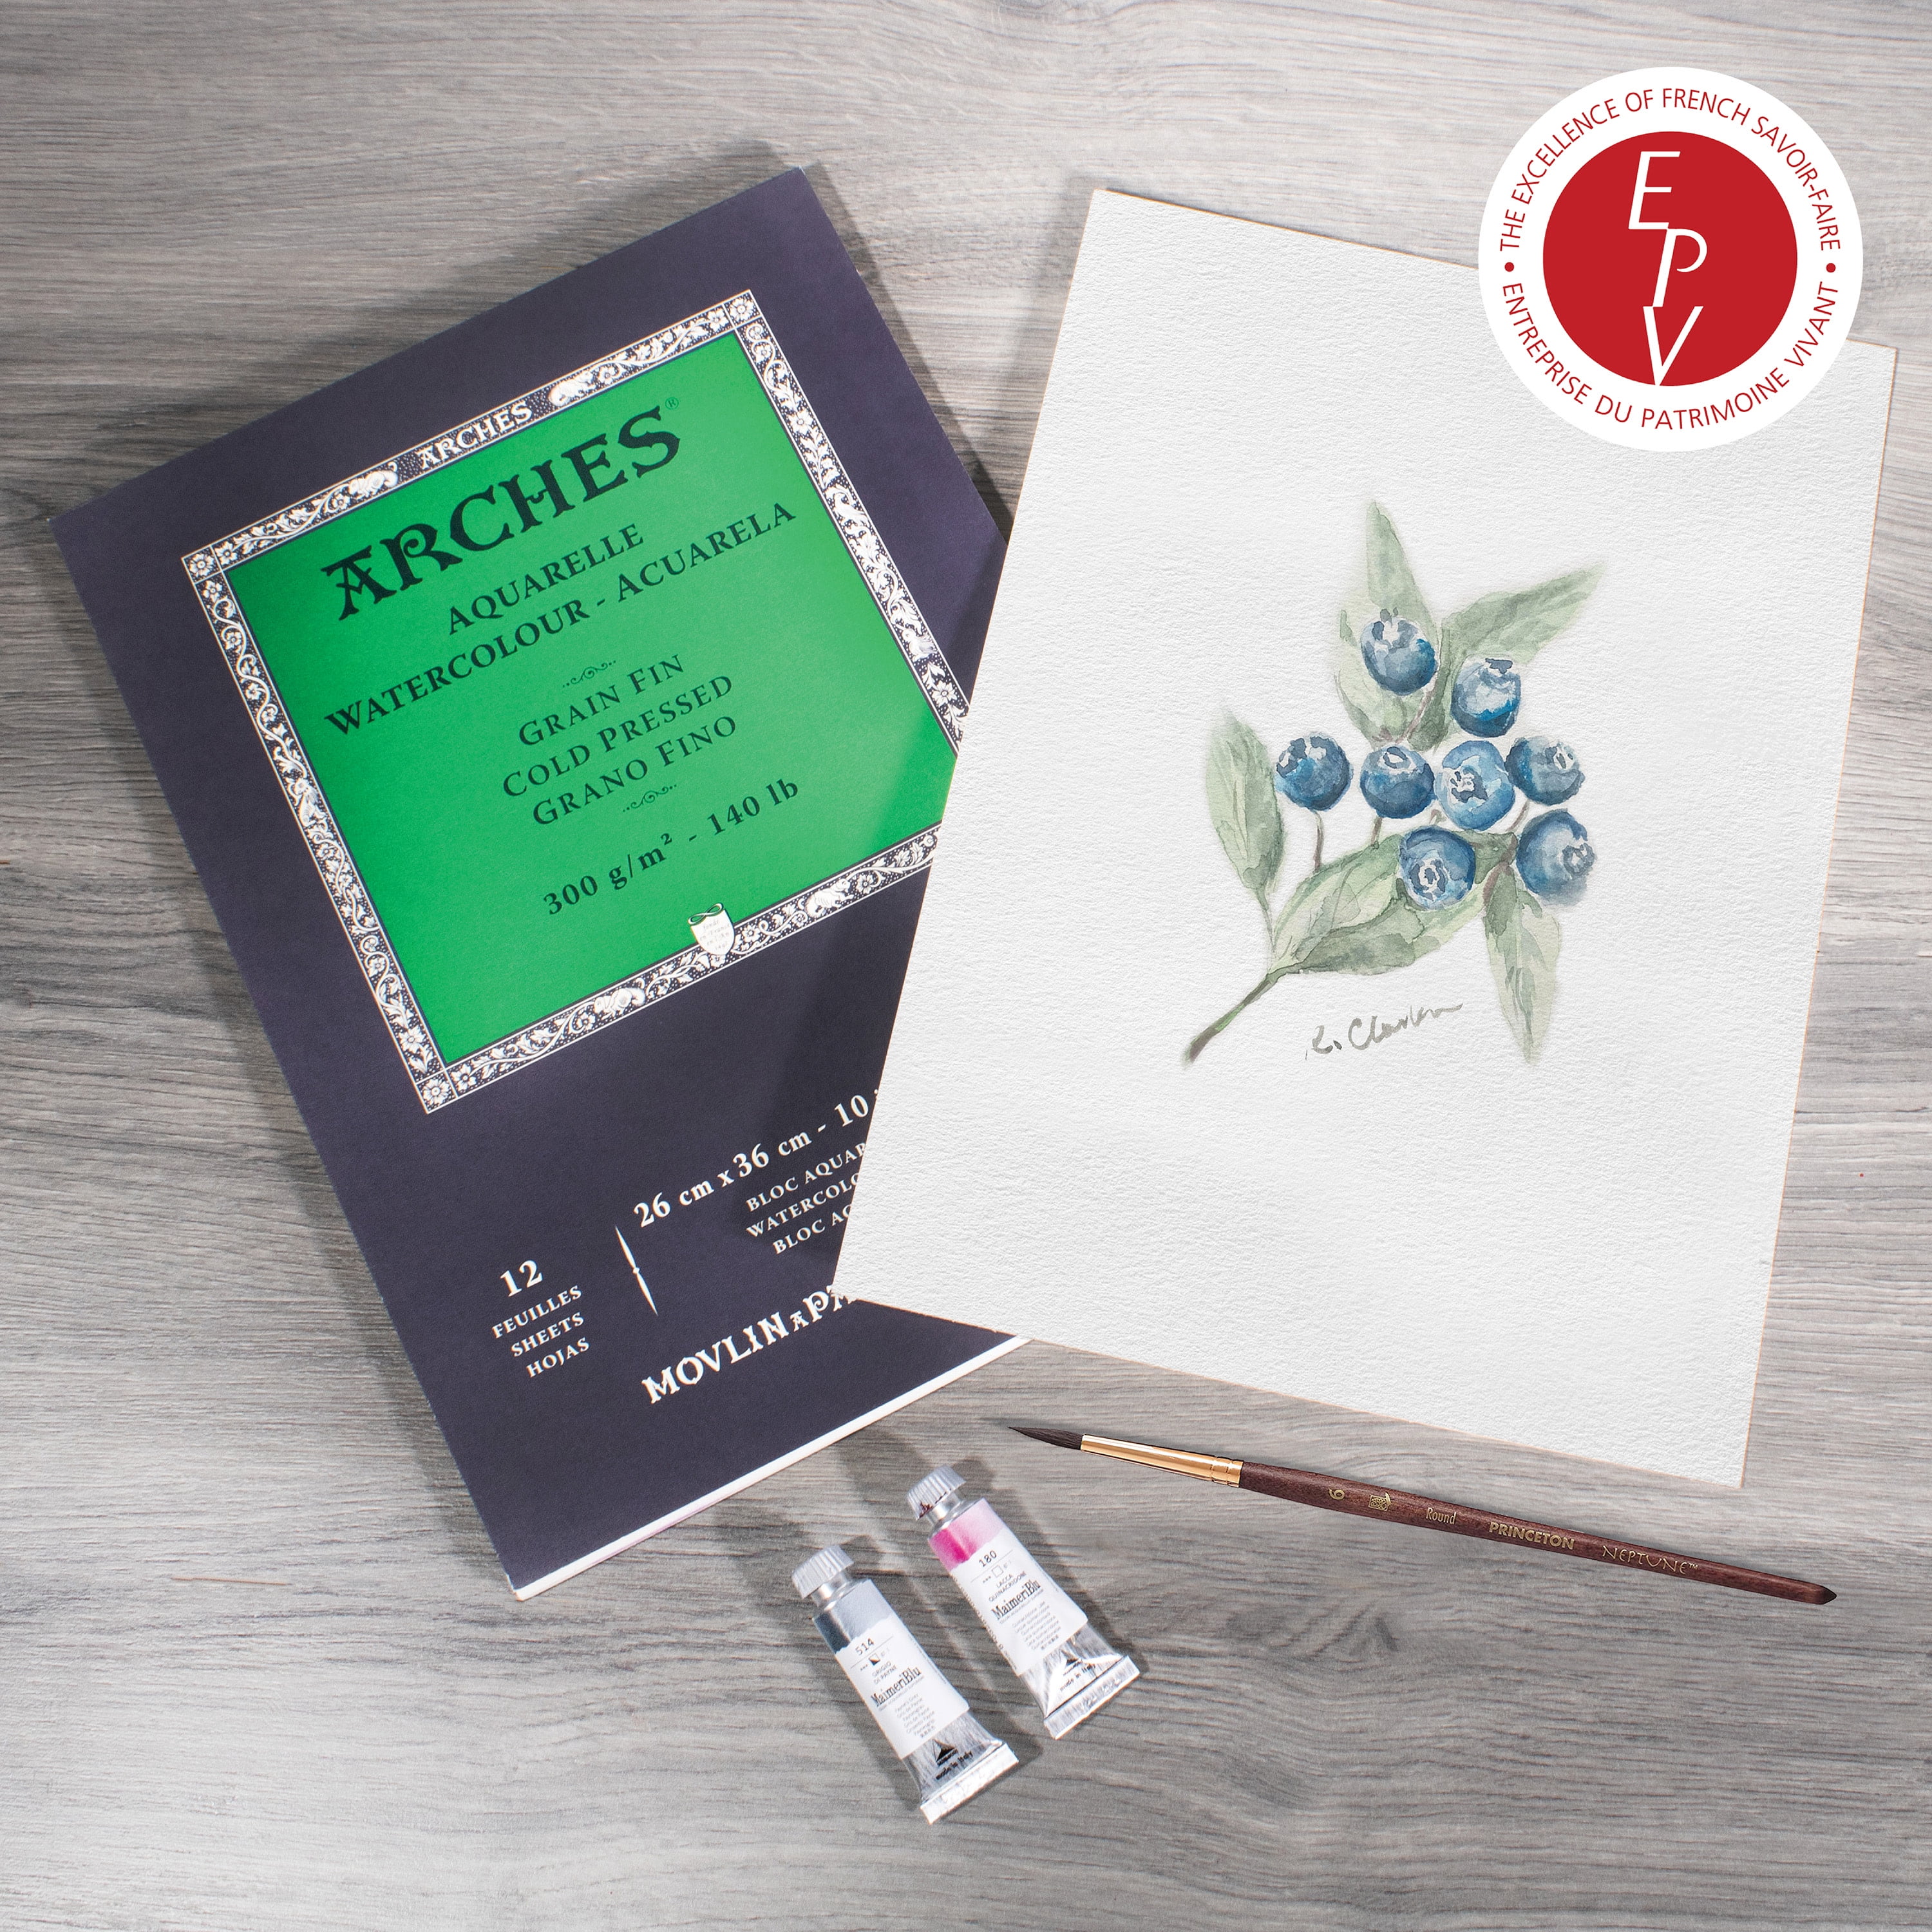 Arches Watercolor Pad 10x14-inch Natural White 100% Cotton Paper - 12 Sheet  Arches Hot Press Watercolor Paper 140 lb Pad - Arches Art Paper for  Watercolor Gouache Ink Acrylic and More